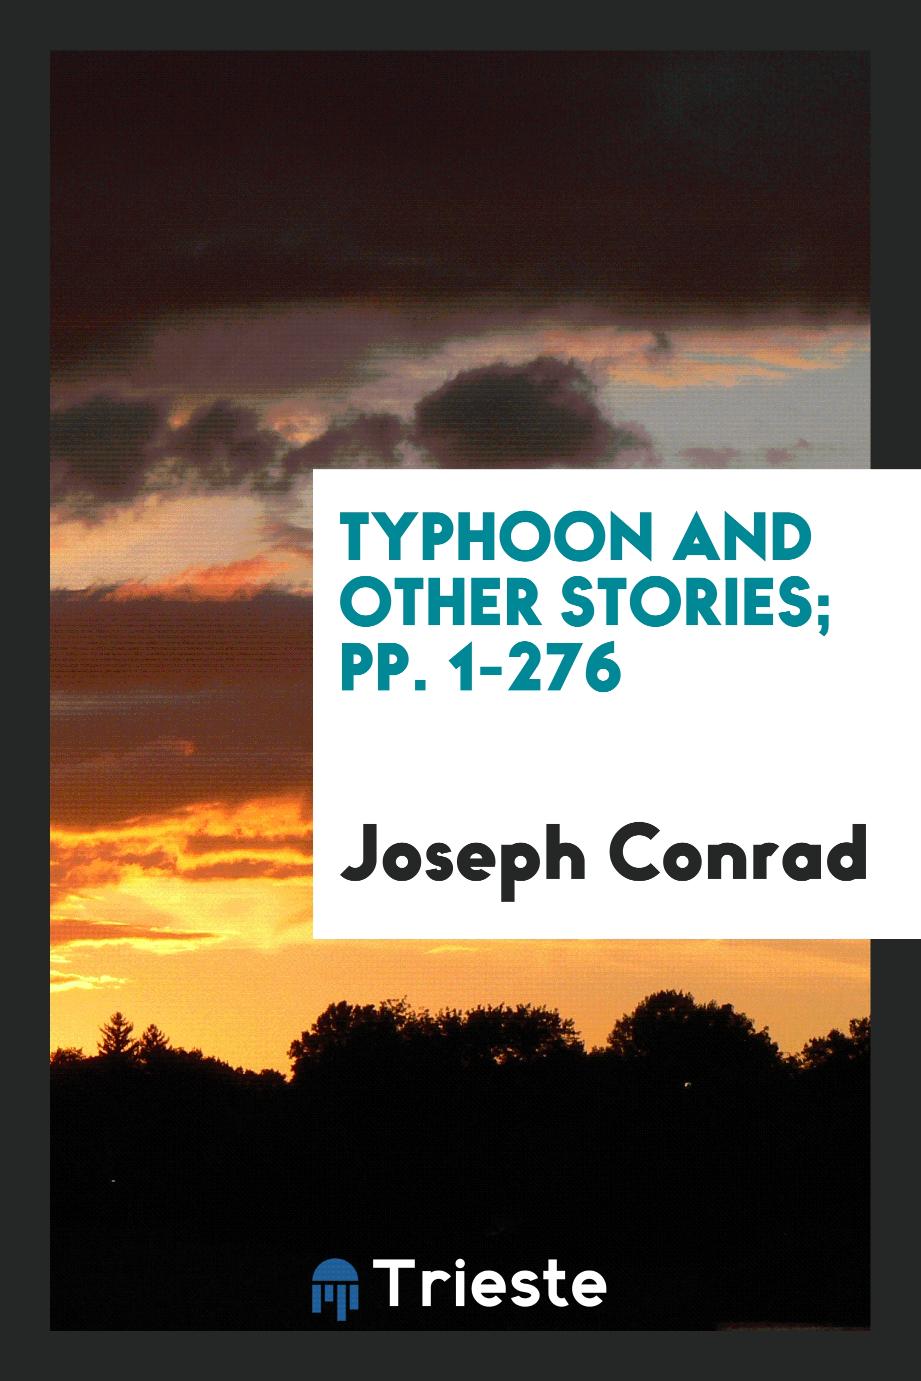 Typhoon and Other Stories; pp. 1-276